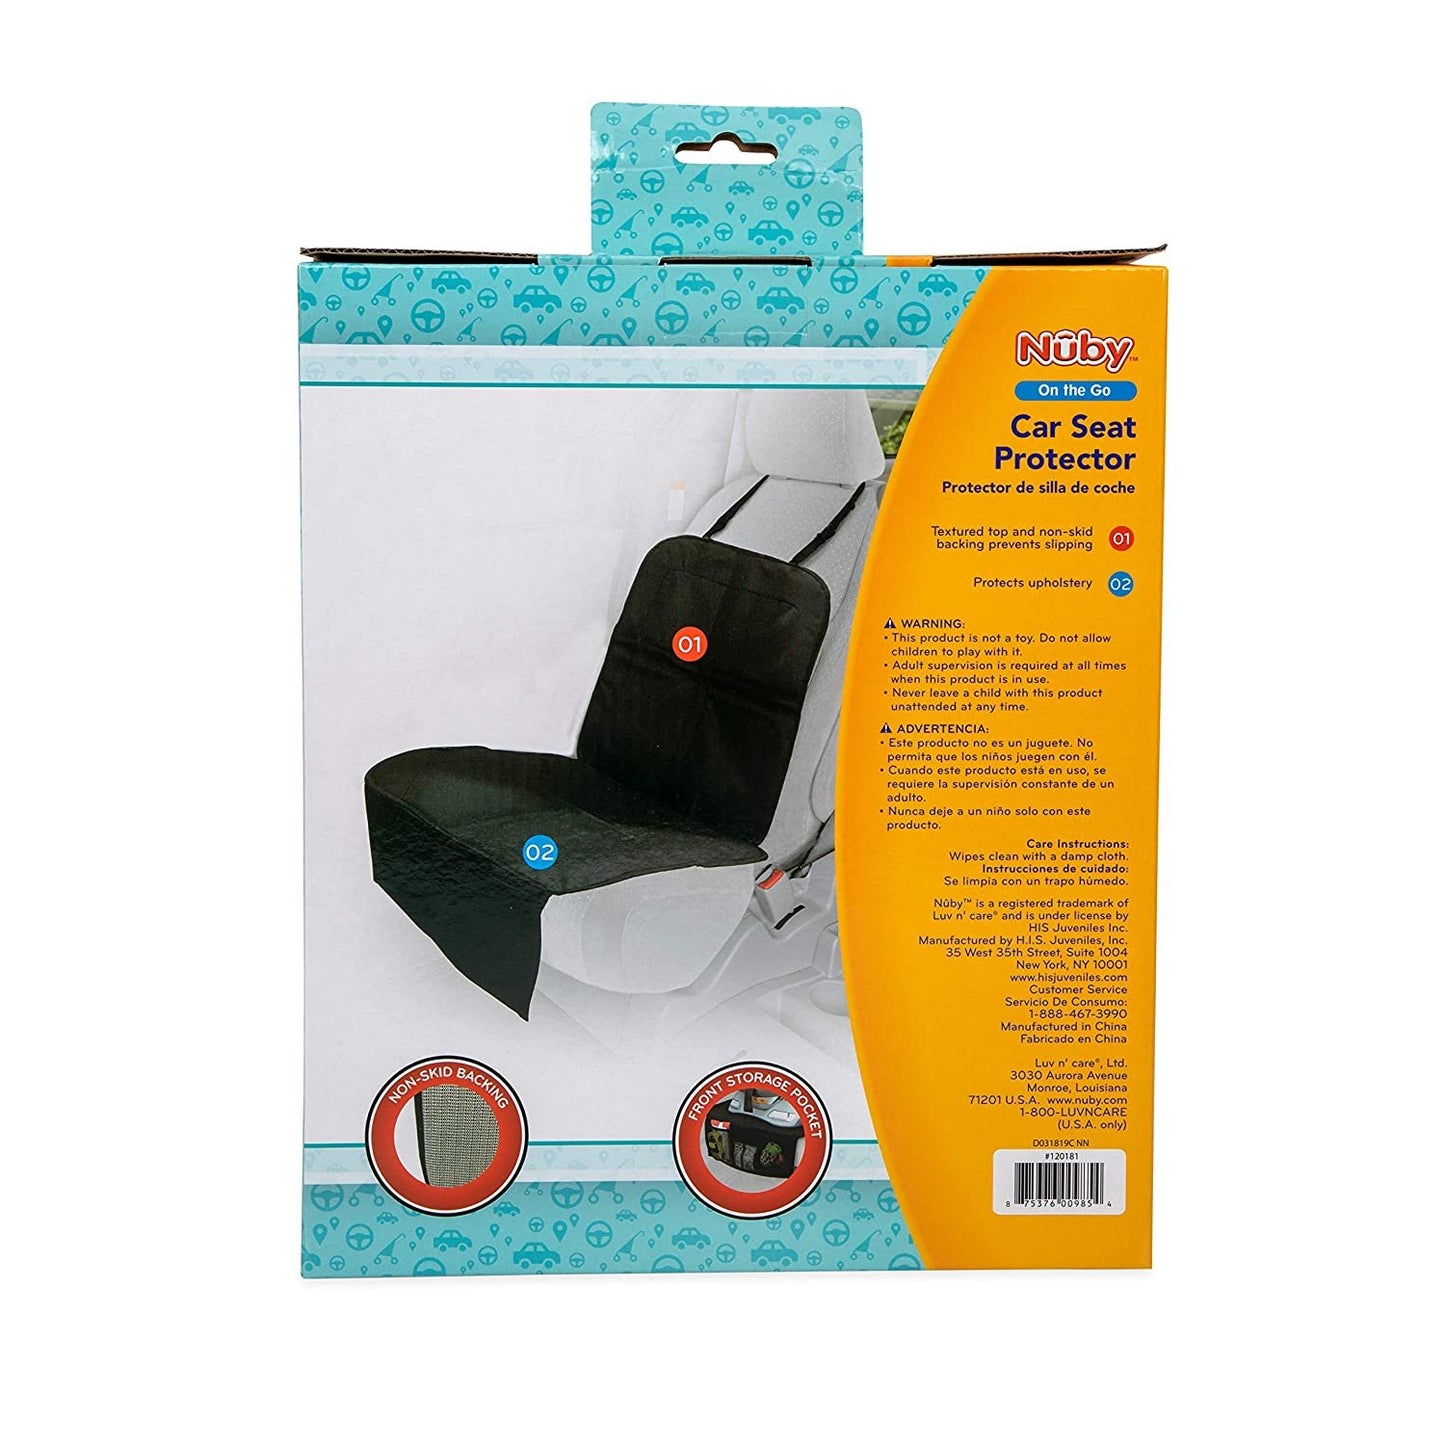 Nuby Deluxe Car Seat Protector, Black Mat for use Under Child's Car Seat